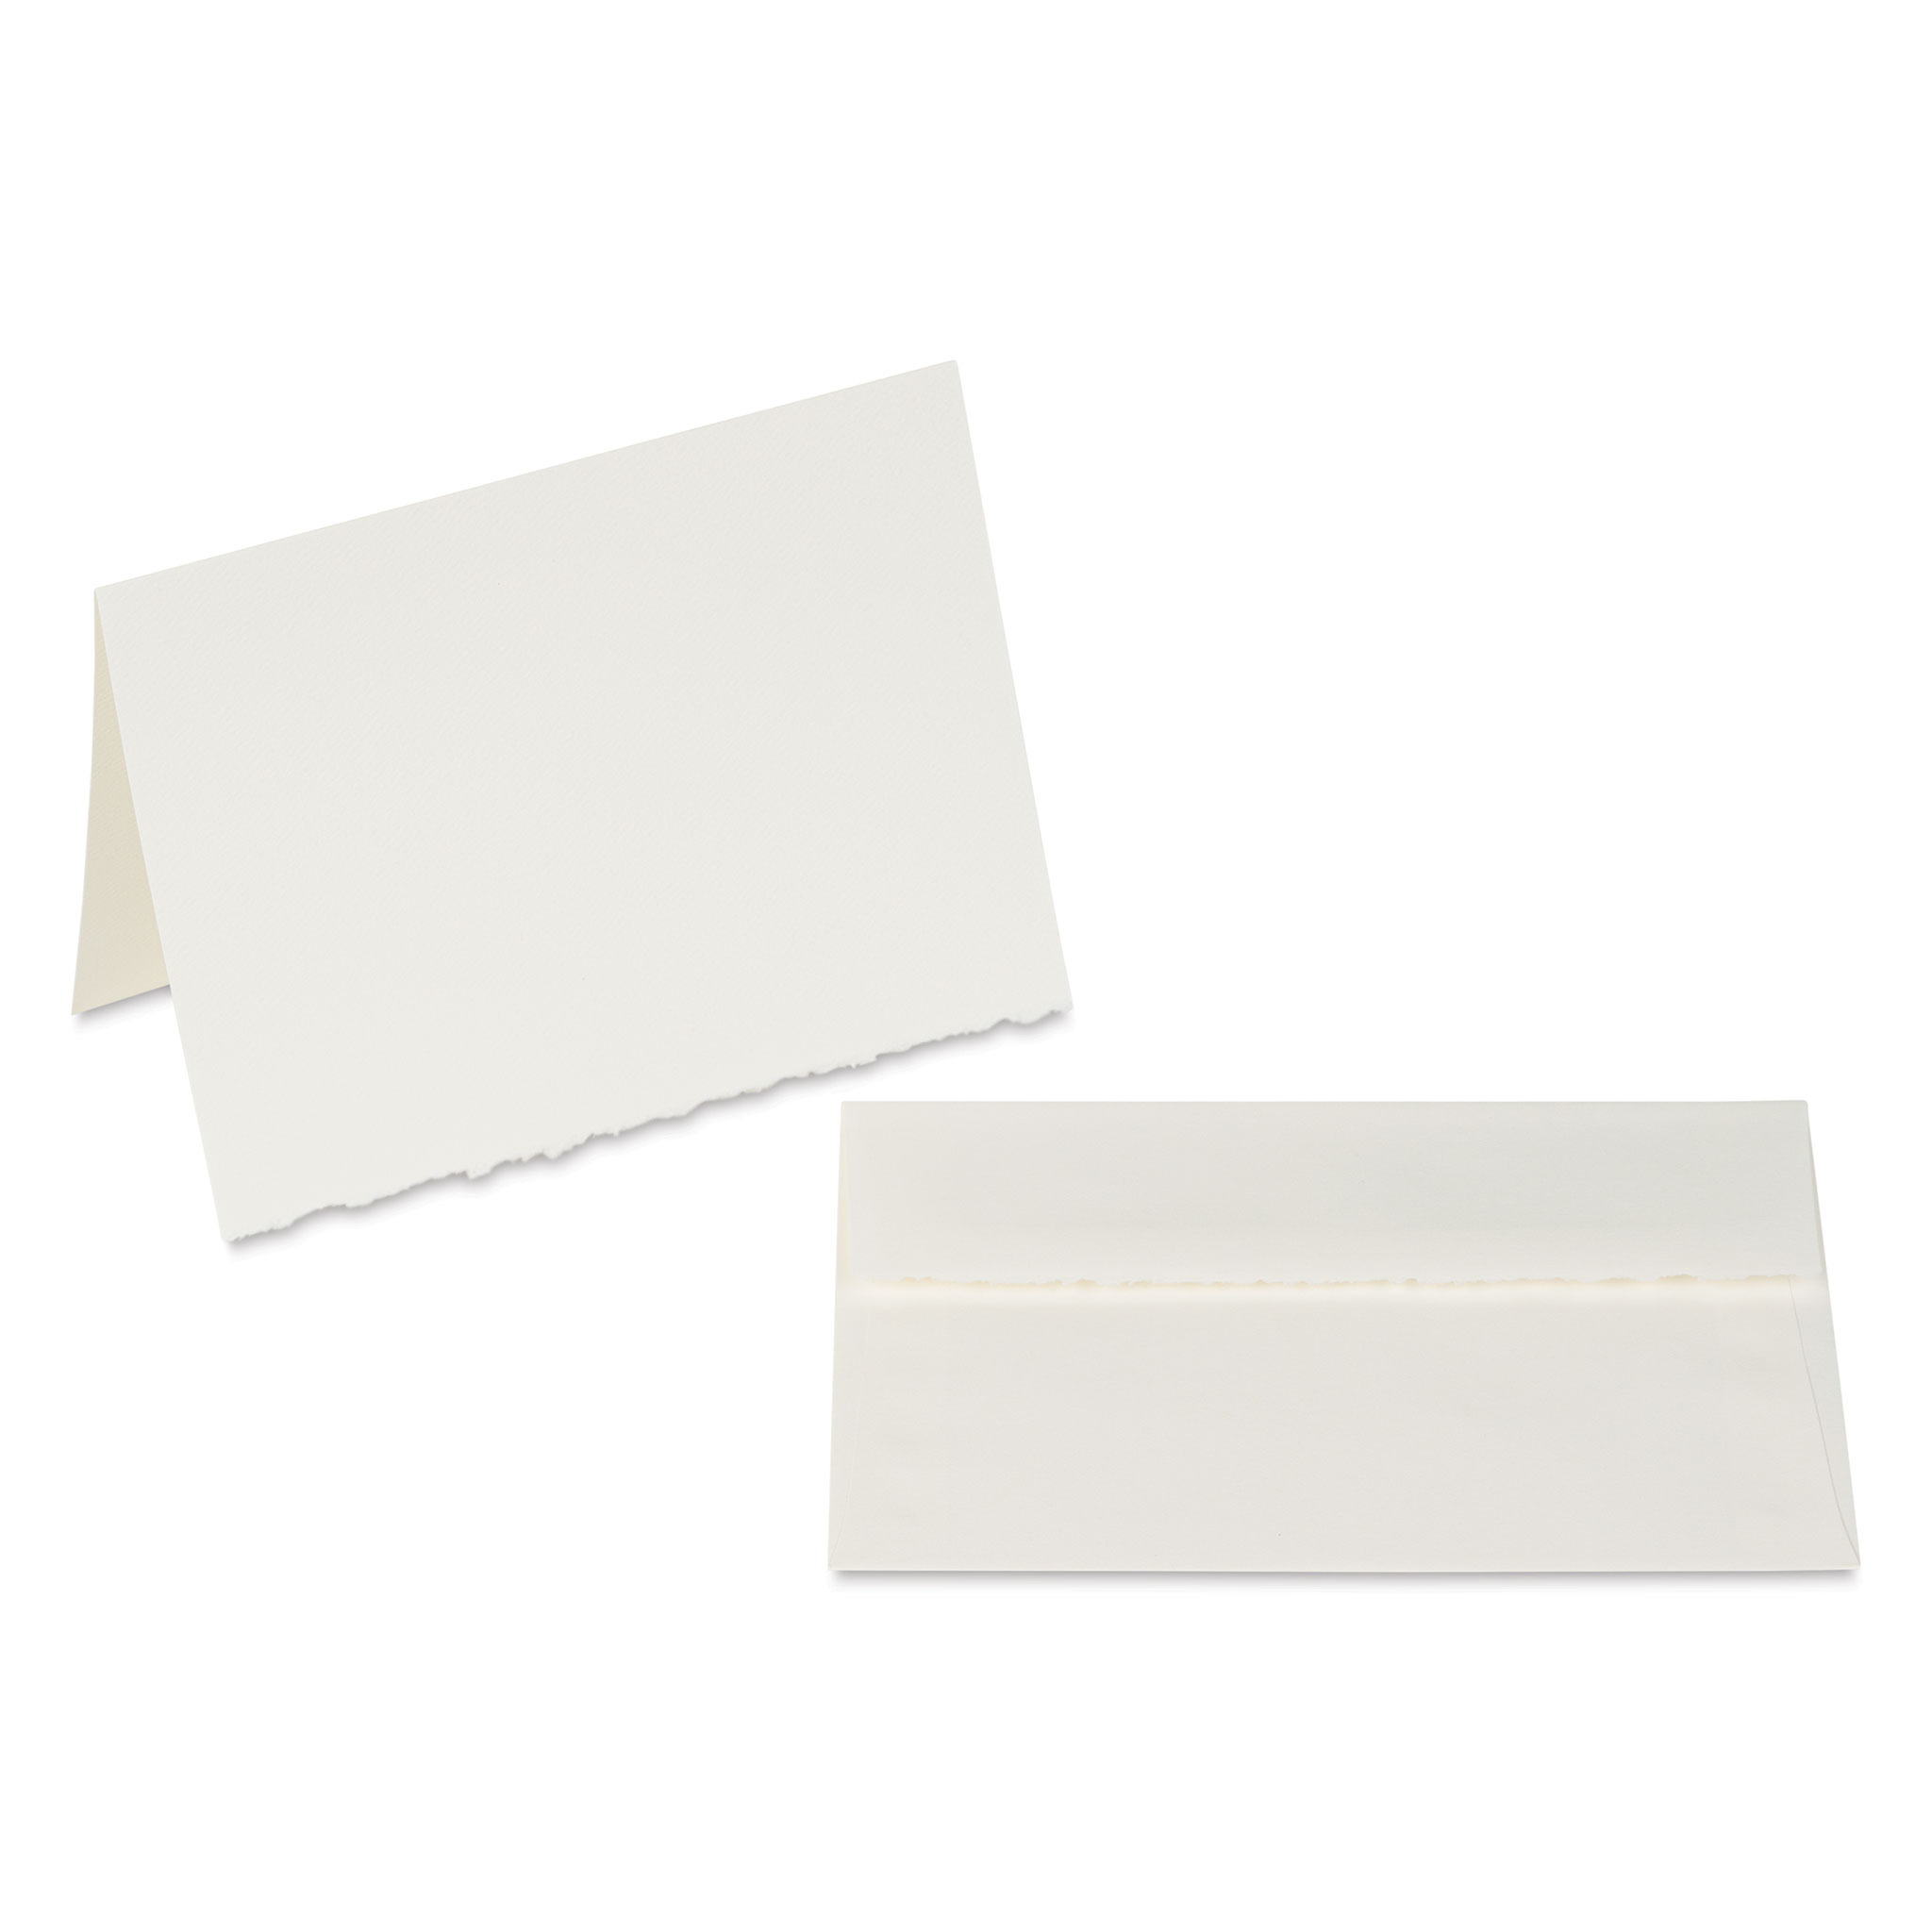  Strathmore Creative Cards, Flourescent White with Deckle Edge,  5x6.875 inches, 50 Pack, Envelopes Included - Custom Greeting Cards for  Weddings, Events, Birthdays : Everything Else